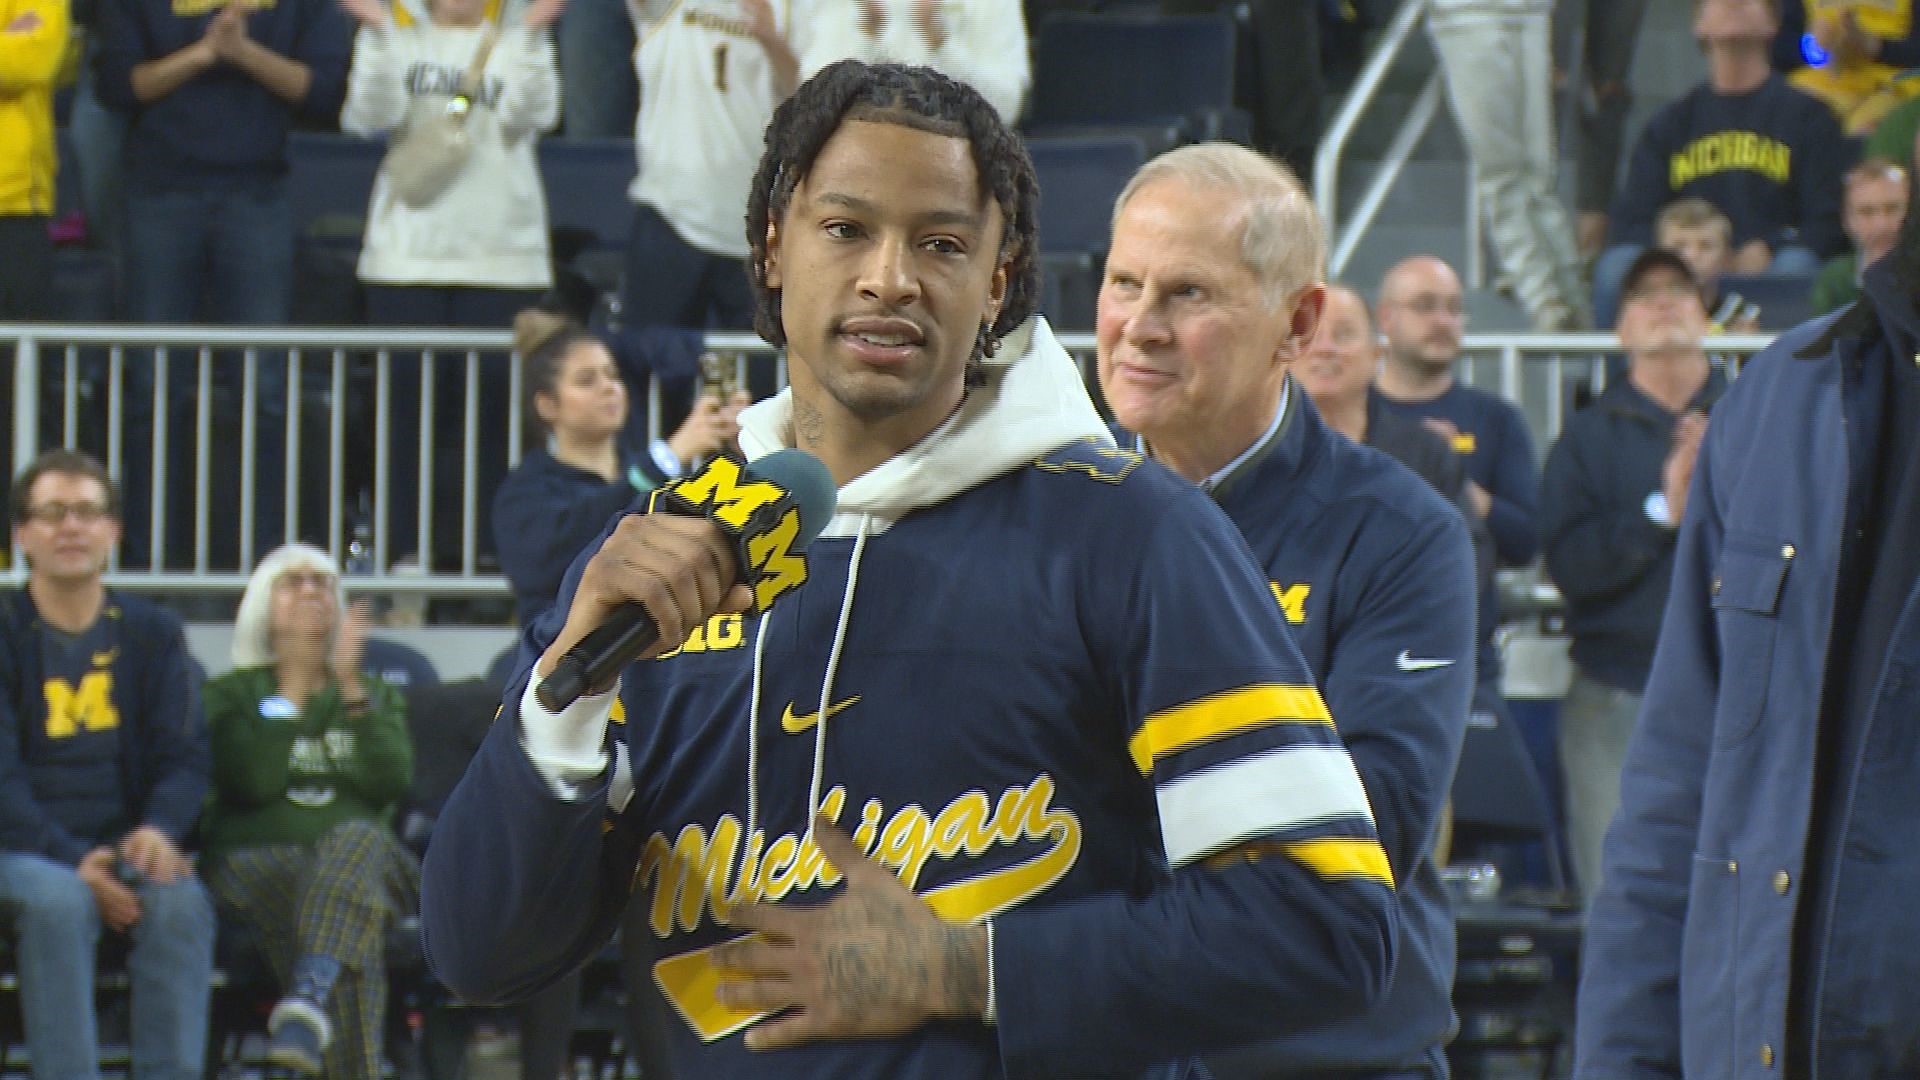 Saturday night proved how fast time flies as the 2013 Michigan basketball team that went to the national championship celebrated its 10-year anniversary.